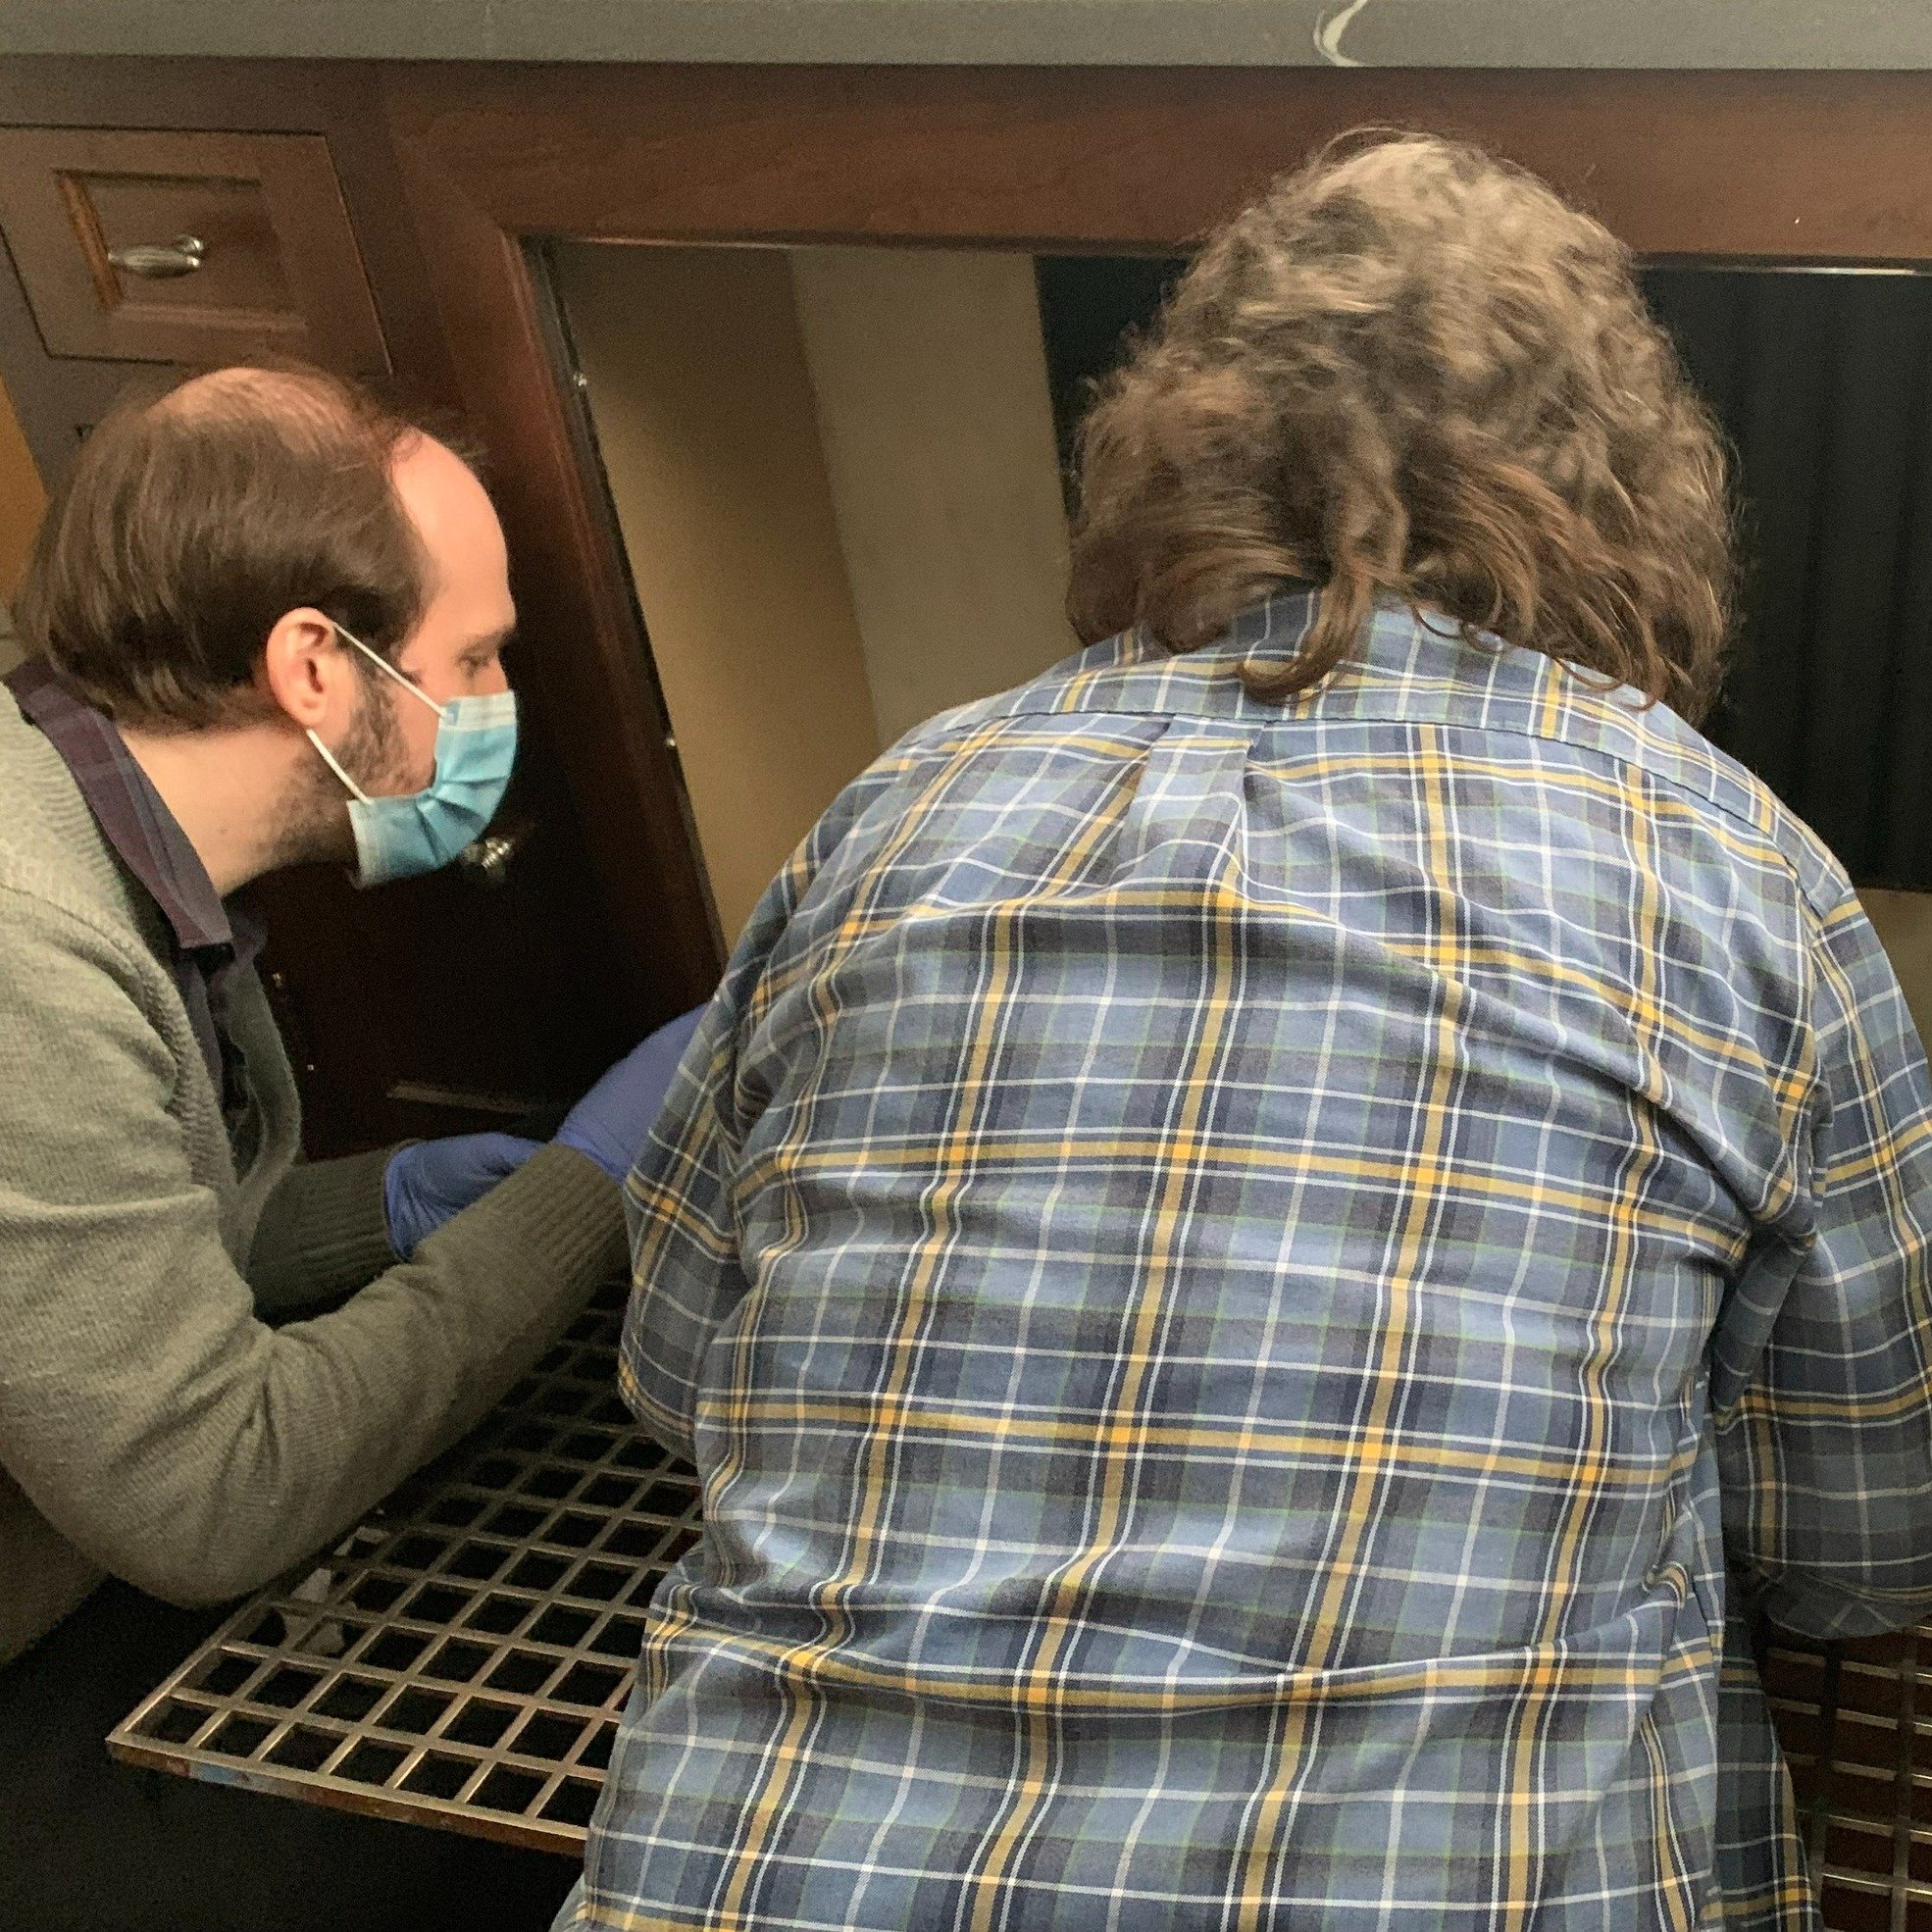 Our first featured #NationalPreservationMonth project is the 'Great Grate' completed by Nick, one of Fair Lane's Conservation Technicians.

Nick says: &quot;I'm proud to have installed this renewed grate in the now completed kitchenette, a room that 